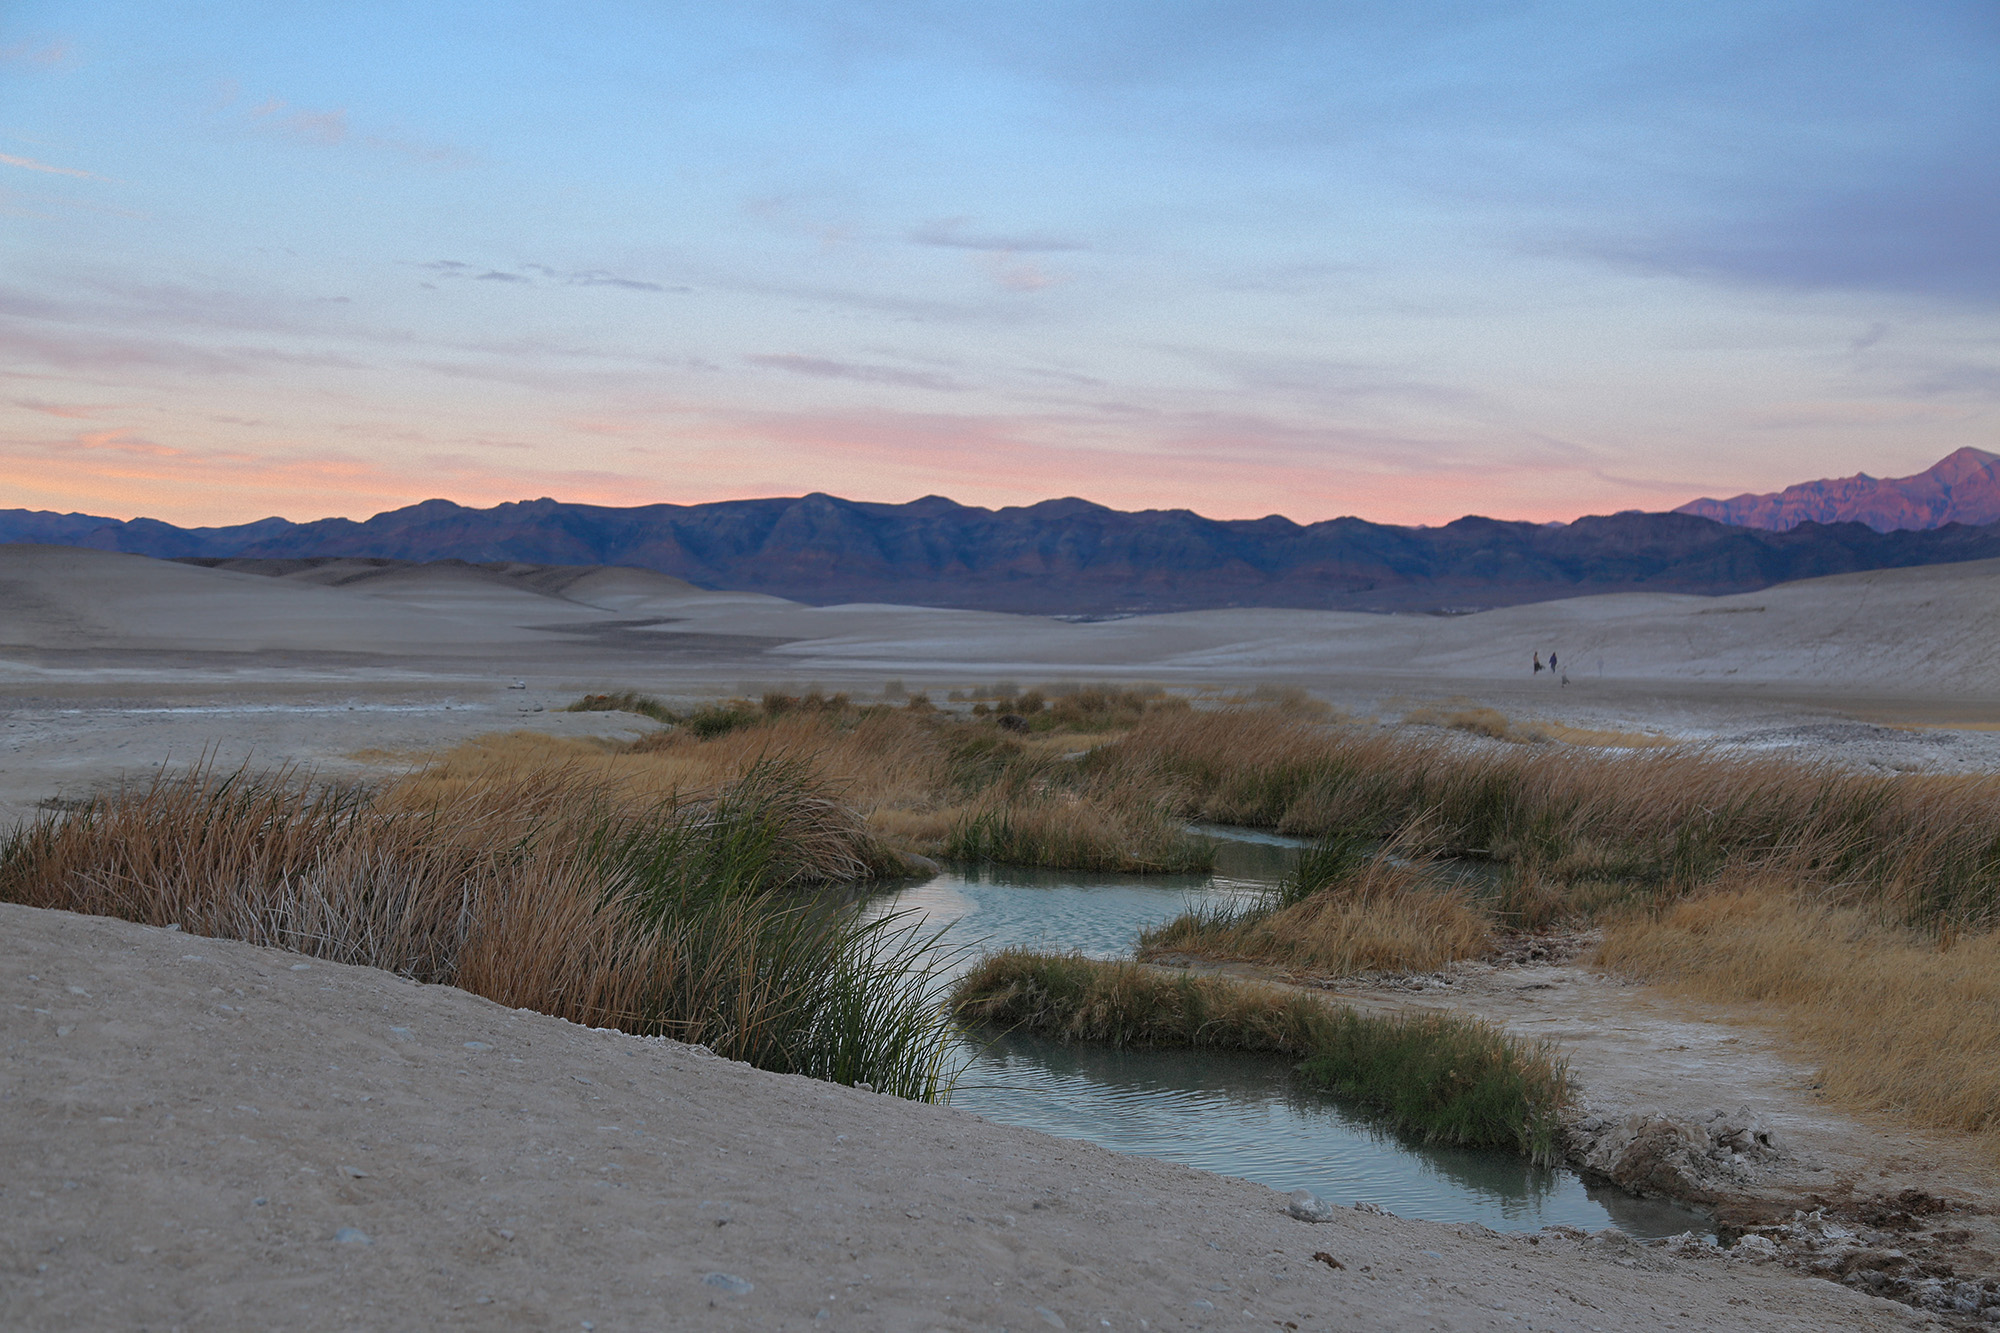 The Tecopa Natural Hot Springs at sunset with mountains in the background near Death Valley National Park.